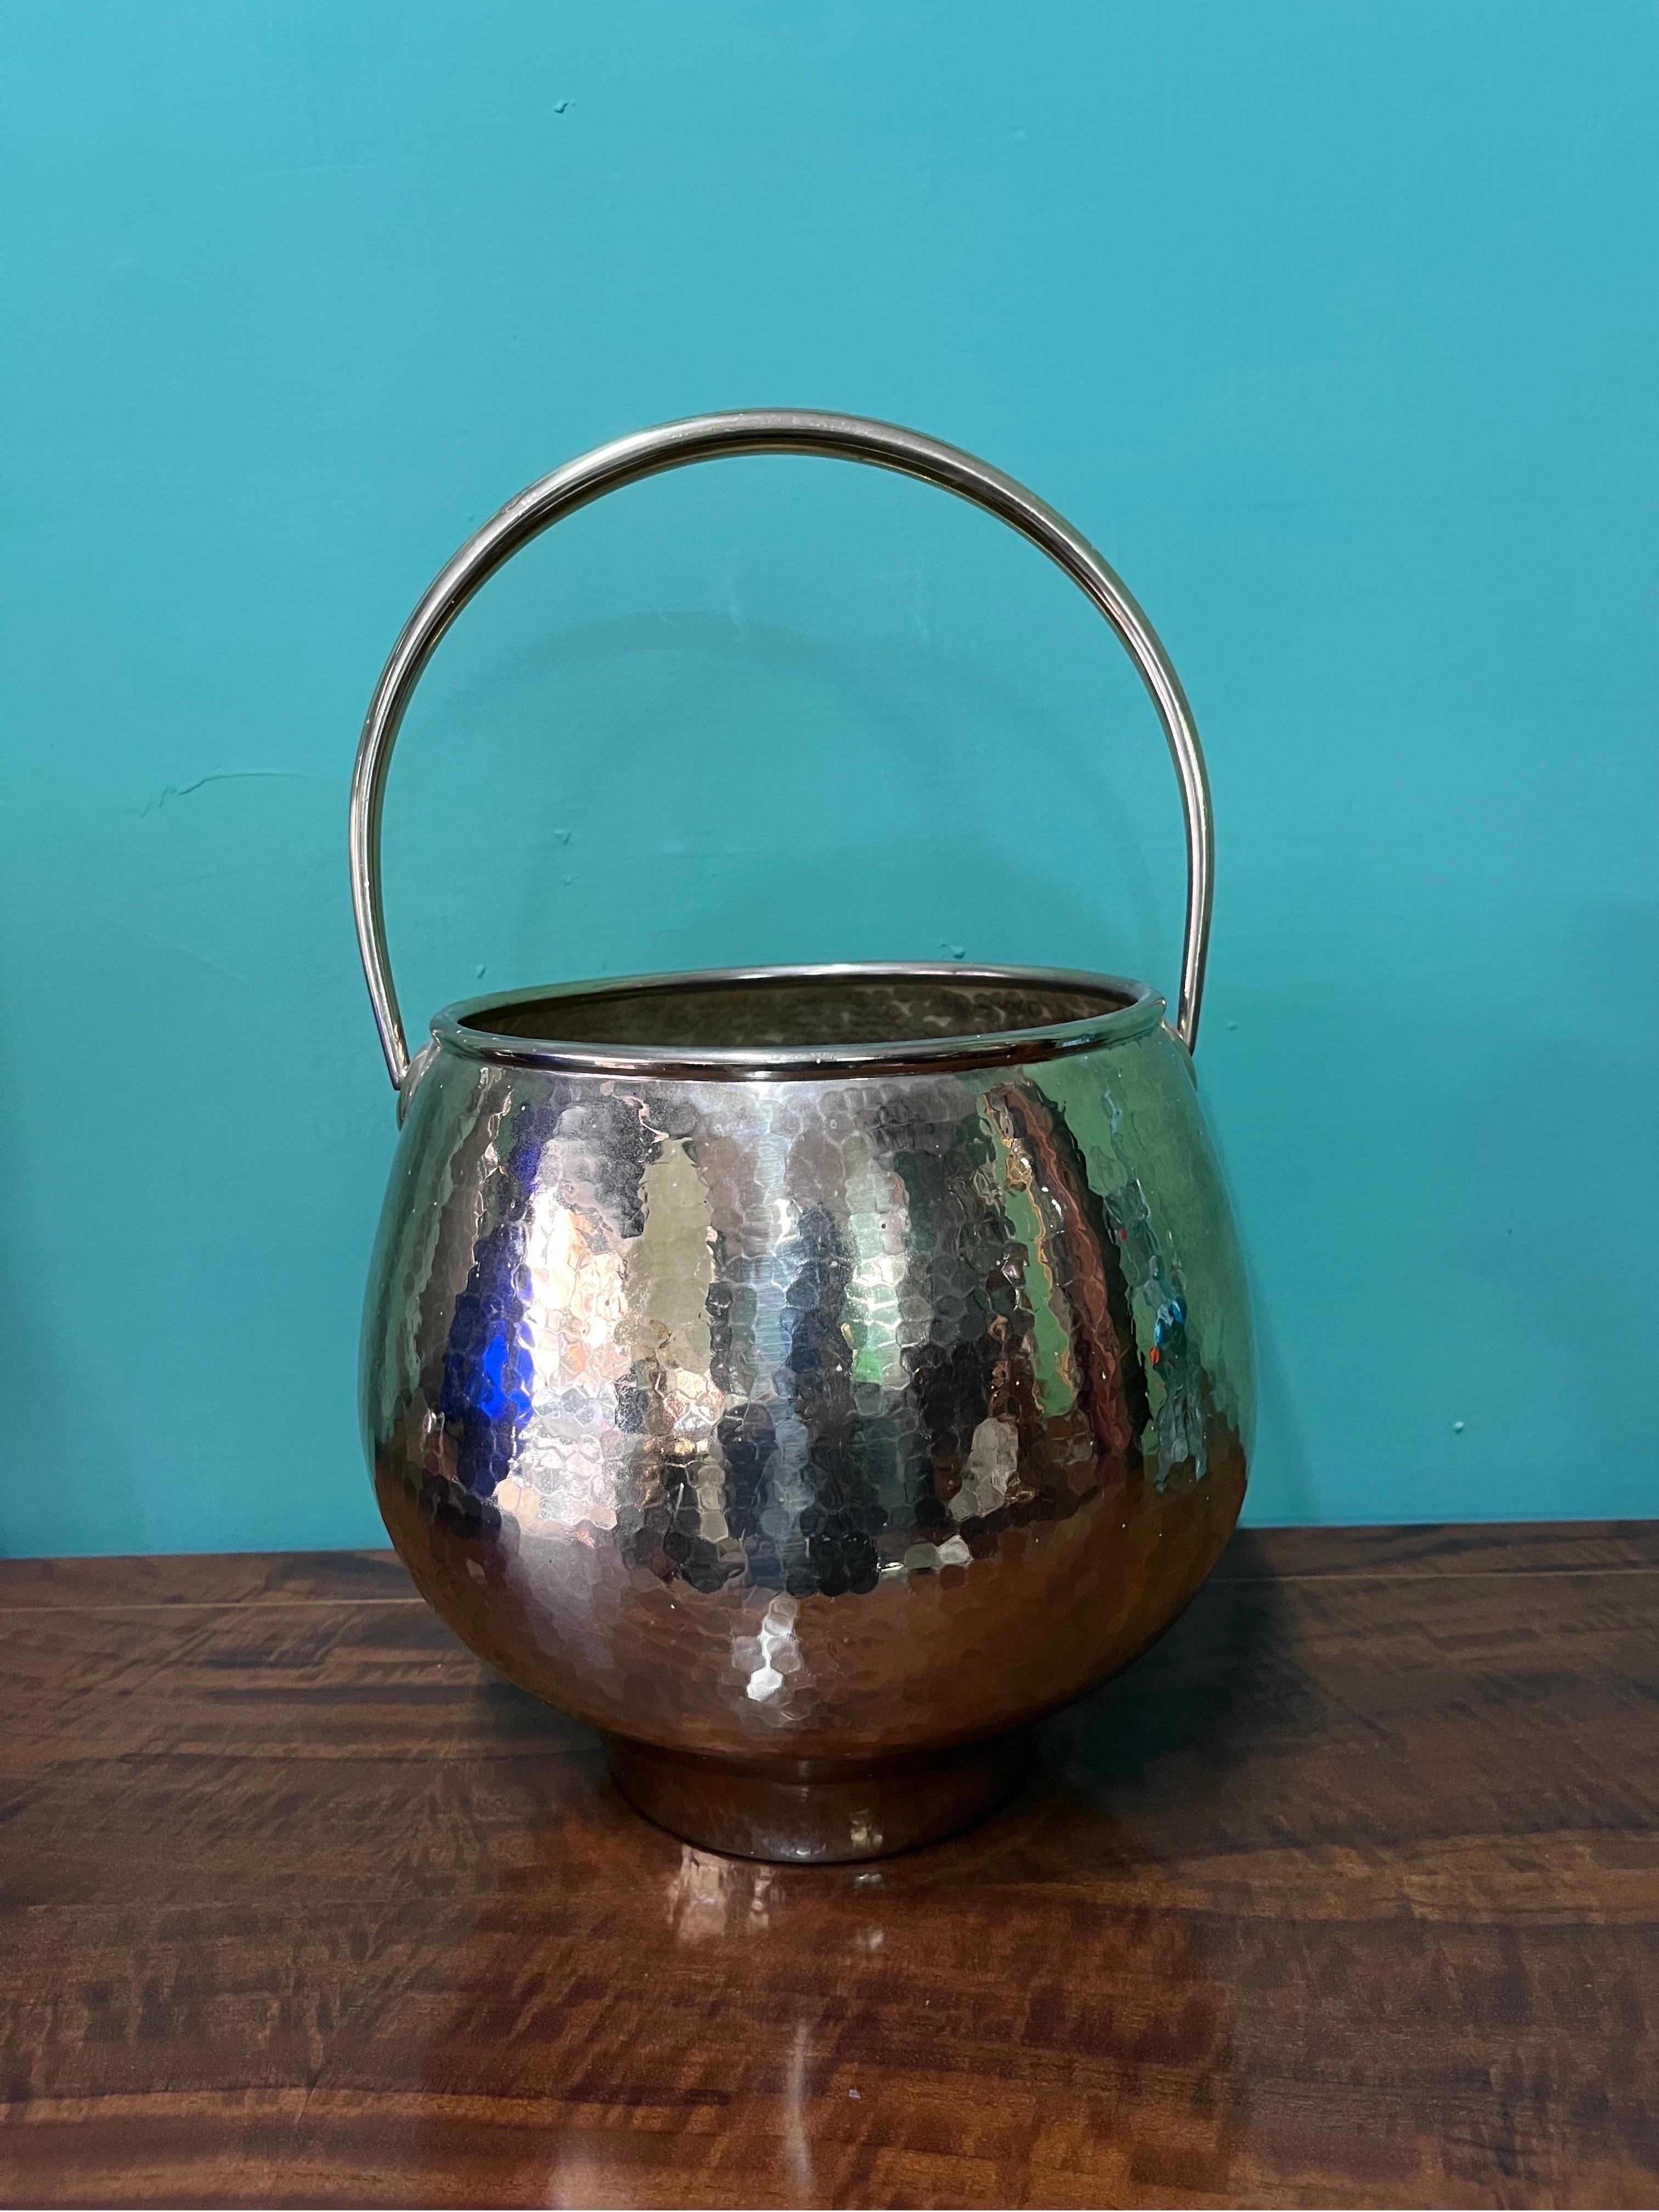 Hammered brass drink holder basket from the 1950s

Very good condition 

Perfect as Christmas gift 

Measures. 
Cm 40 h x cm 23 x cm 23.